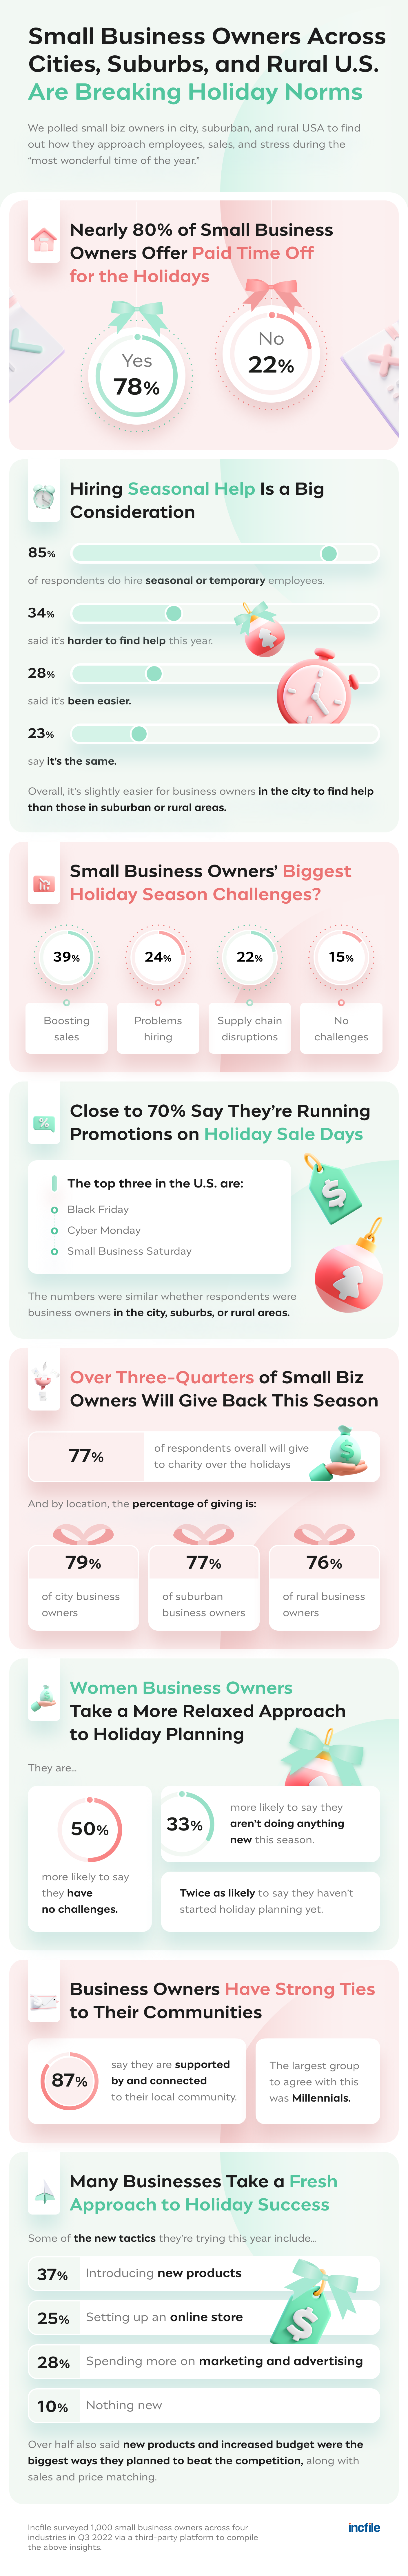 Incfile small business holiday marketing survey